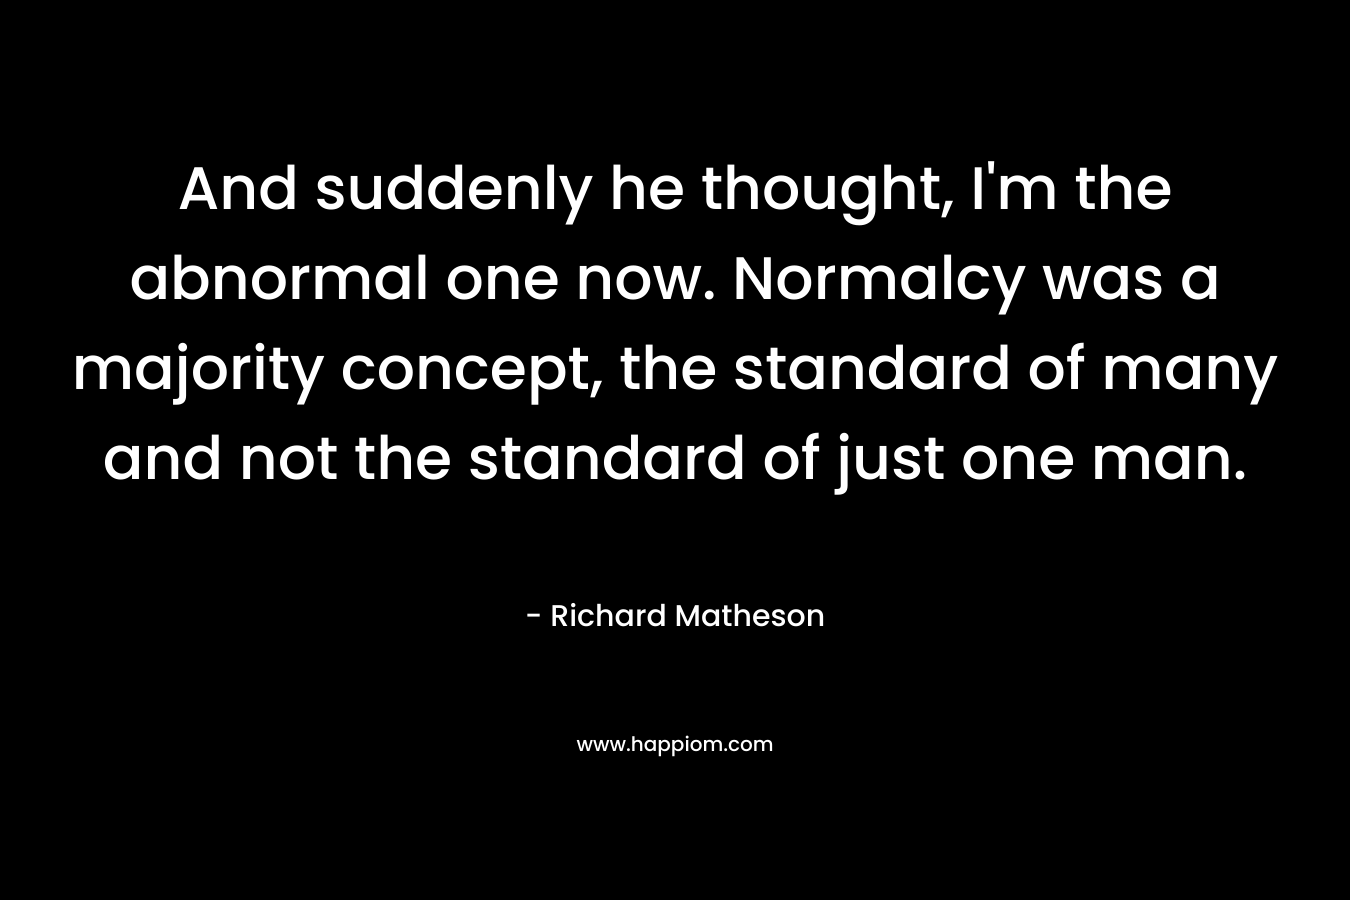 And suddenly he thought, I'm the abnormal one now. Normalcy was a majority concept, the standard of many and not the standard of just one man.